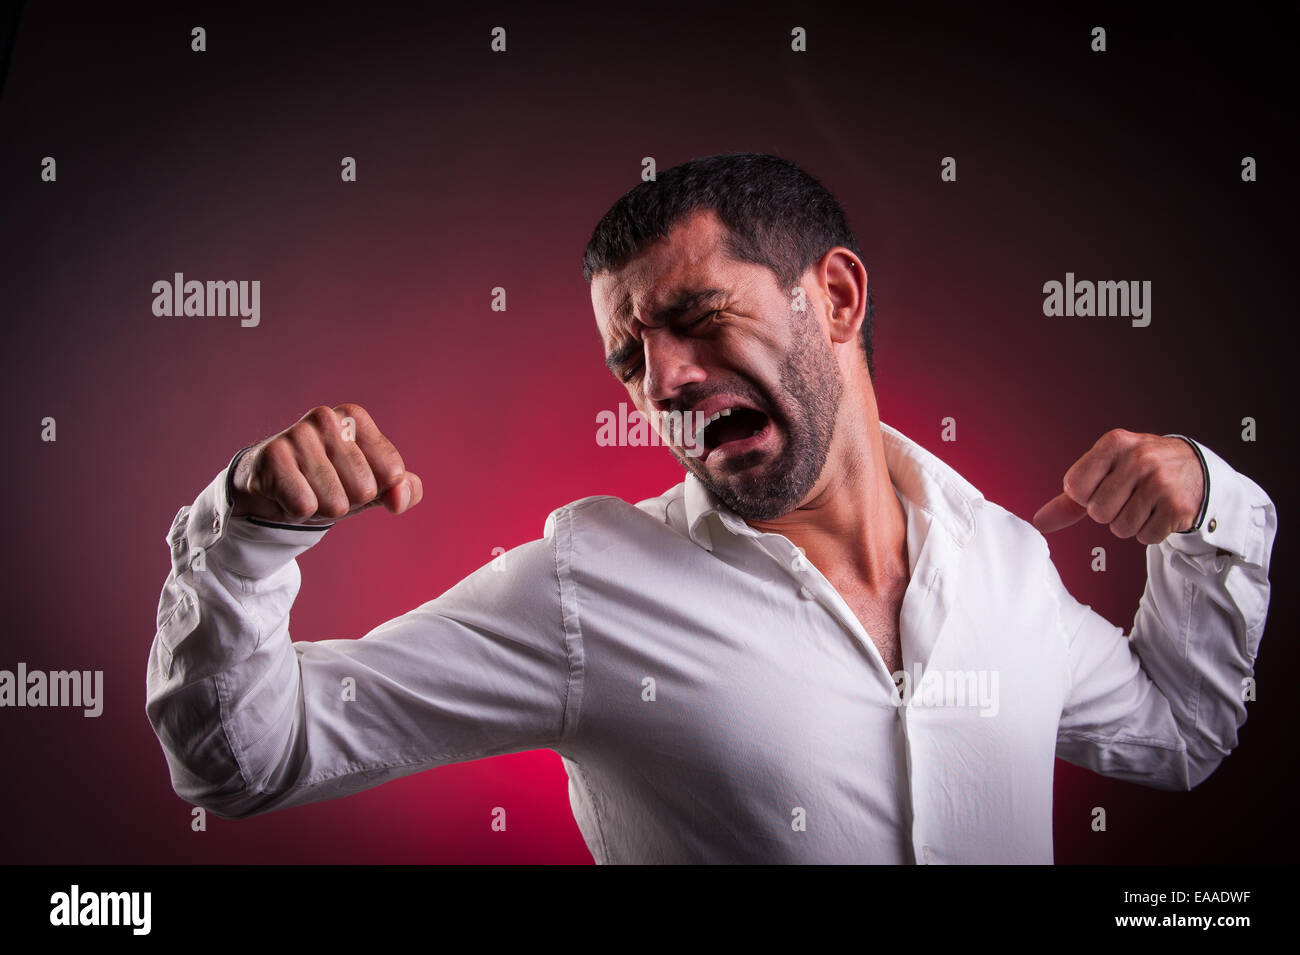 man stretching or being lazy Stock Photo